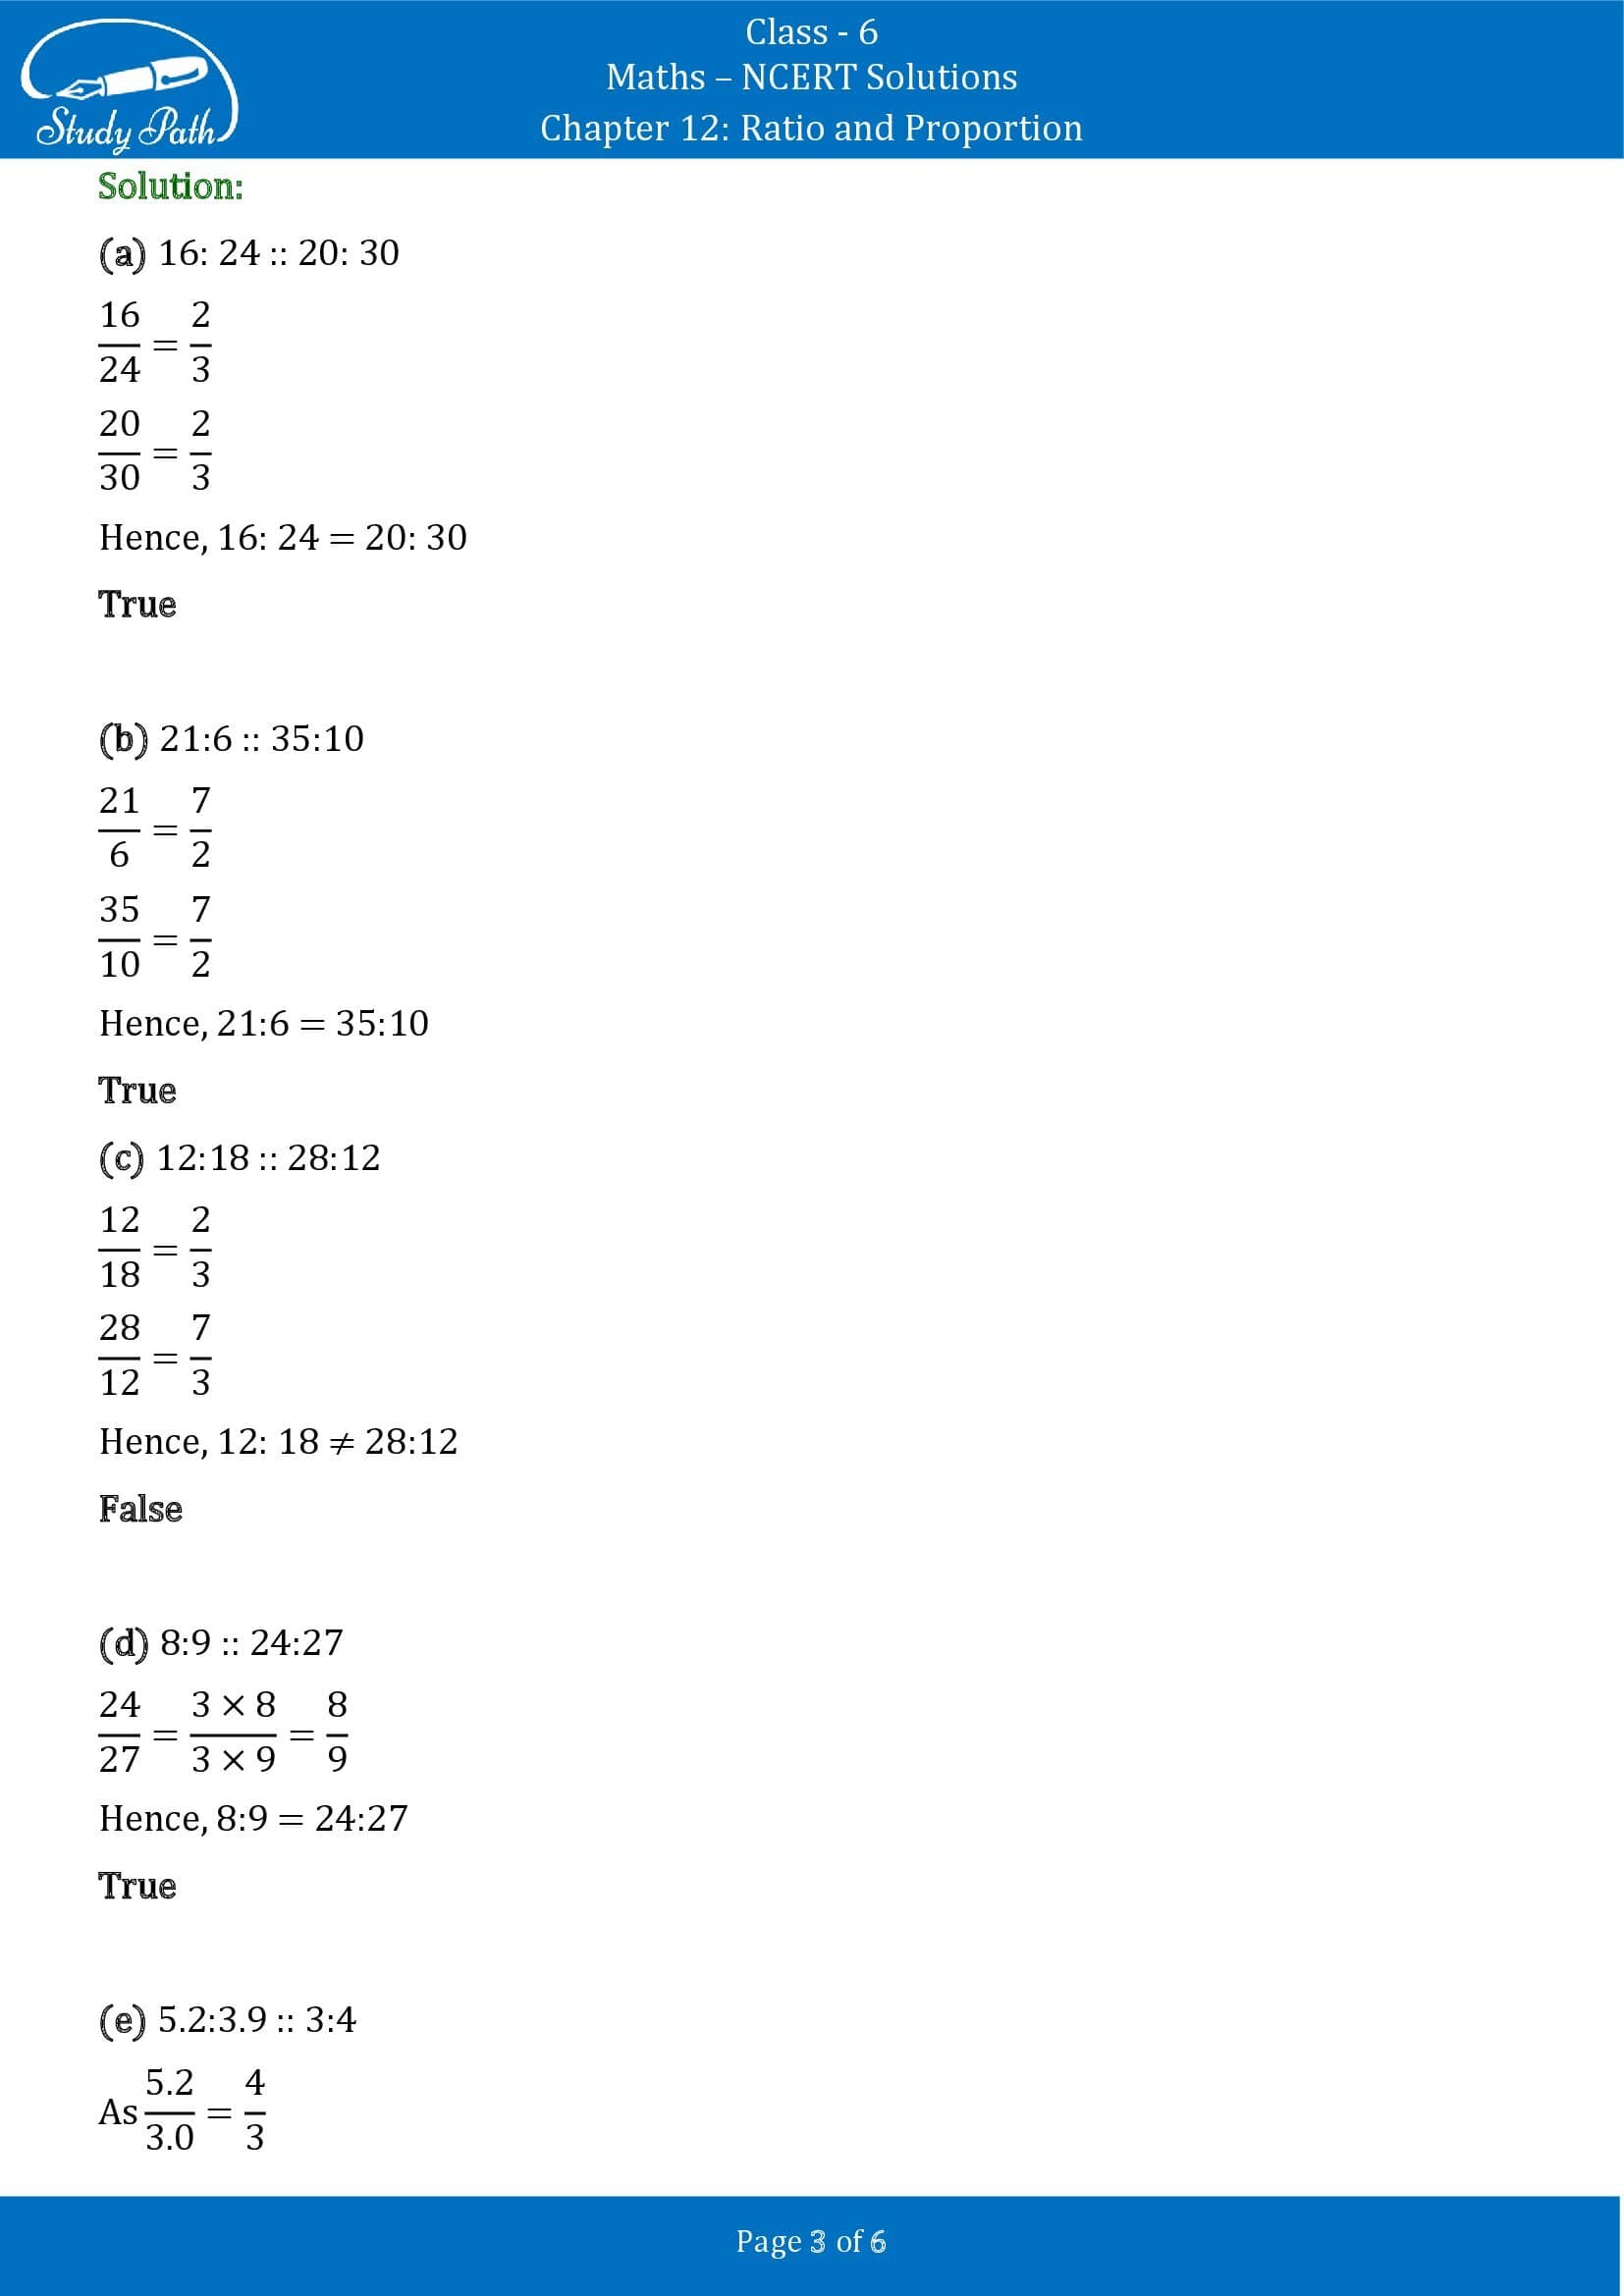 NCERT Solutions for Class 6 Maths Chapter 12 Ratio and Proportion Exercise 12.2 00003